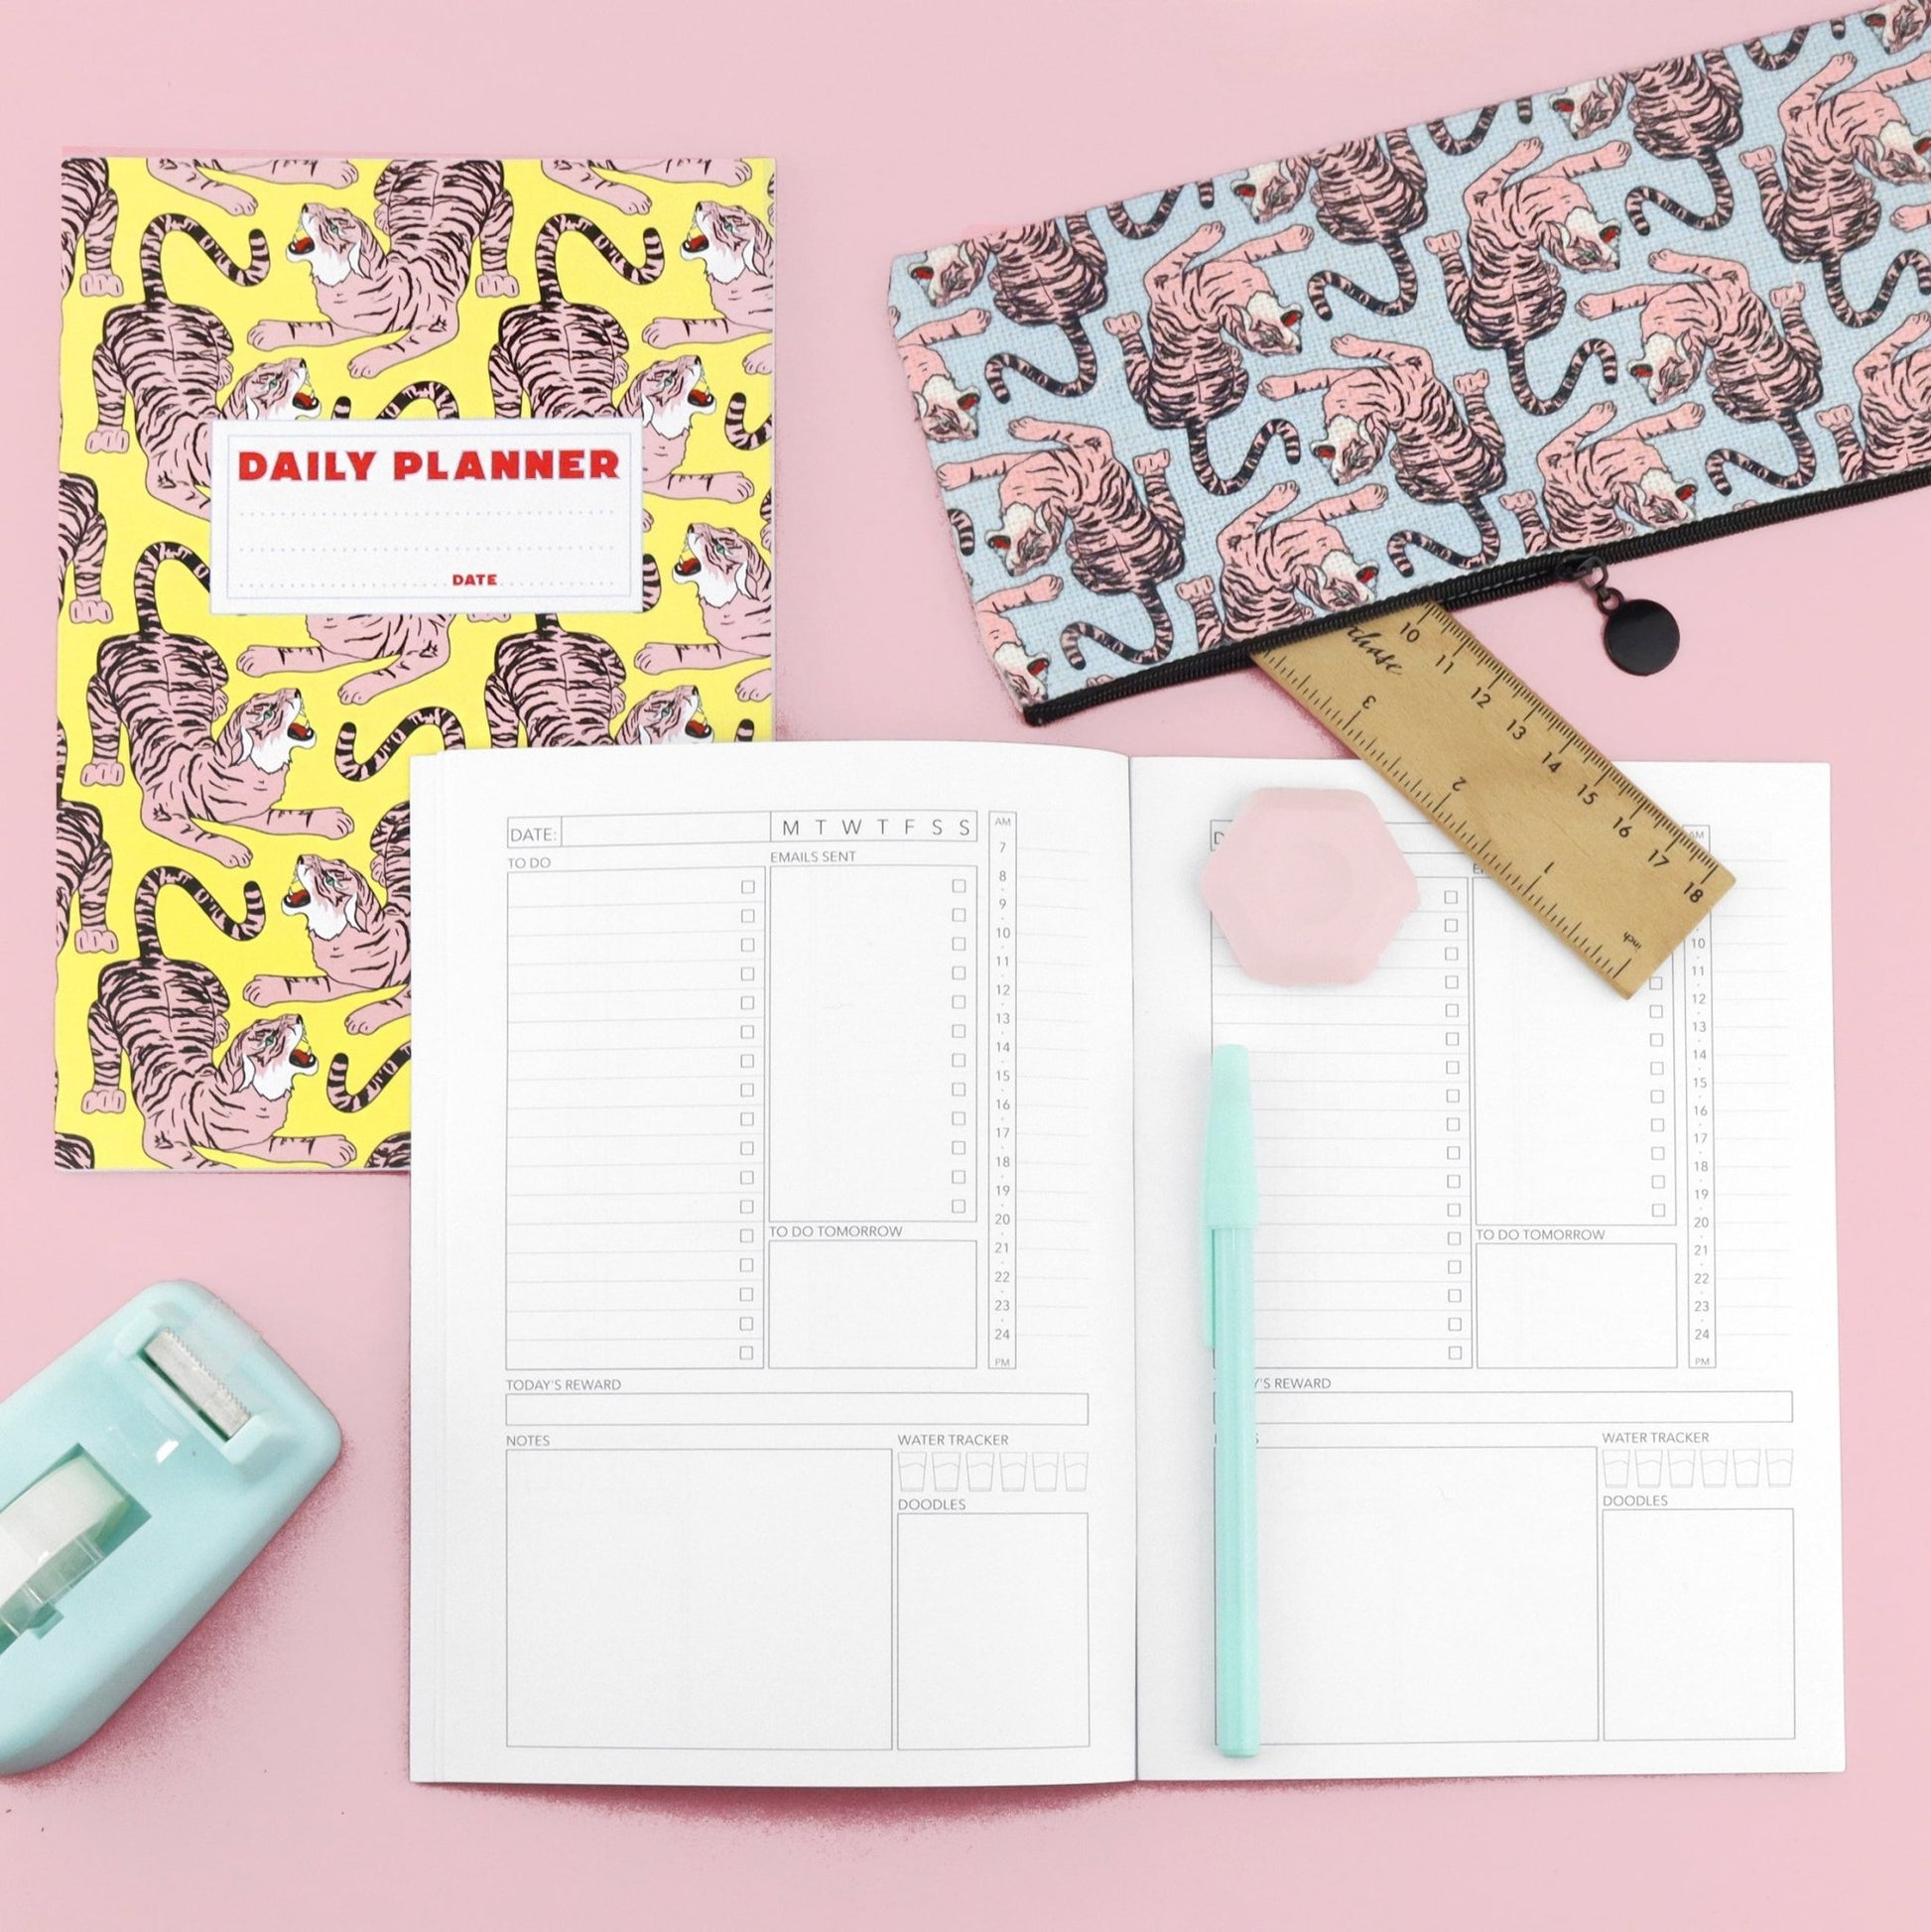 Grr Power Tiger Daily Planner - Fawn and Thistle